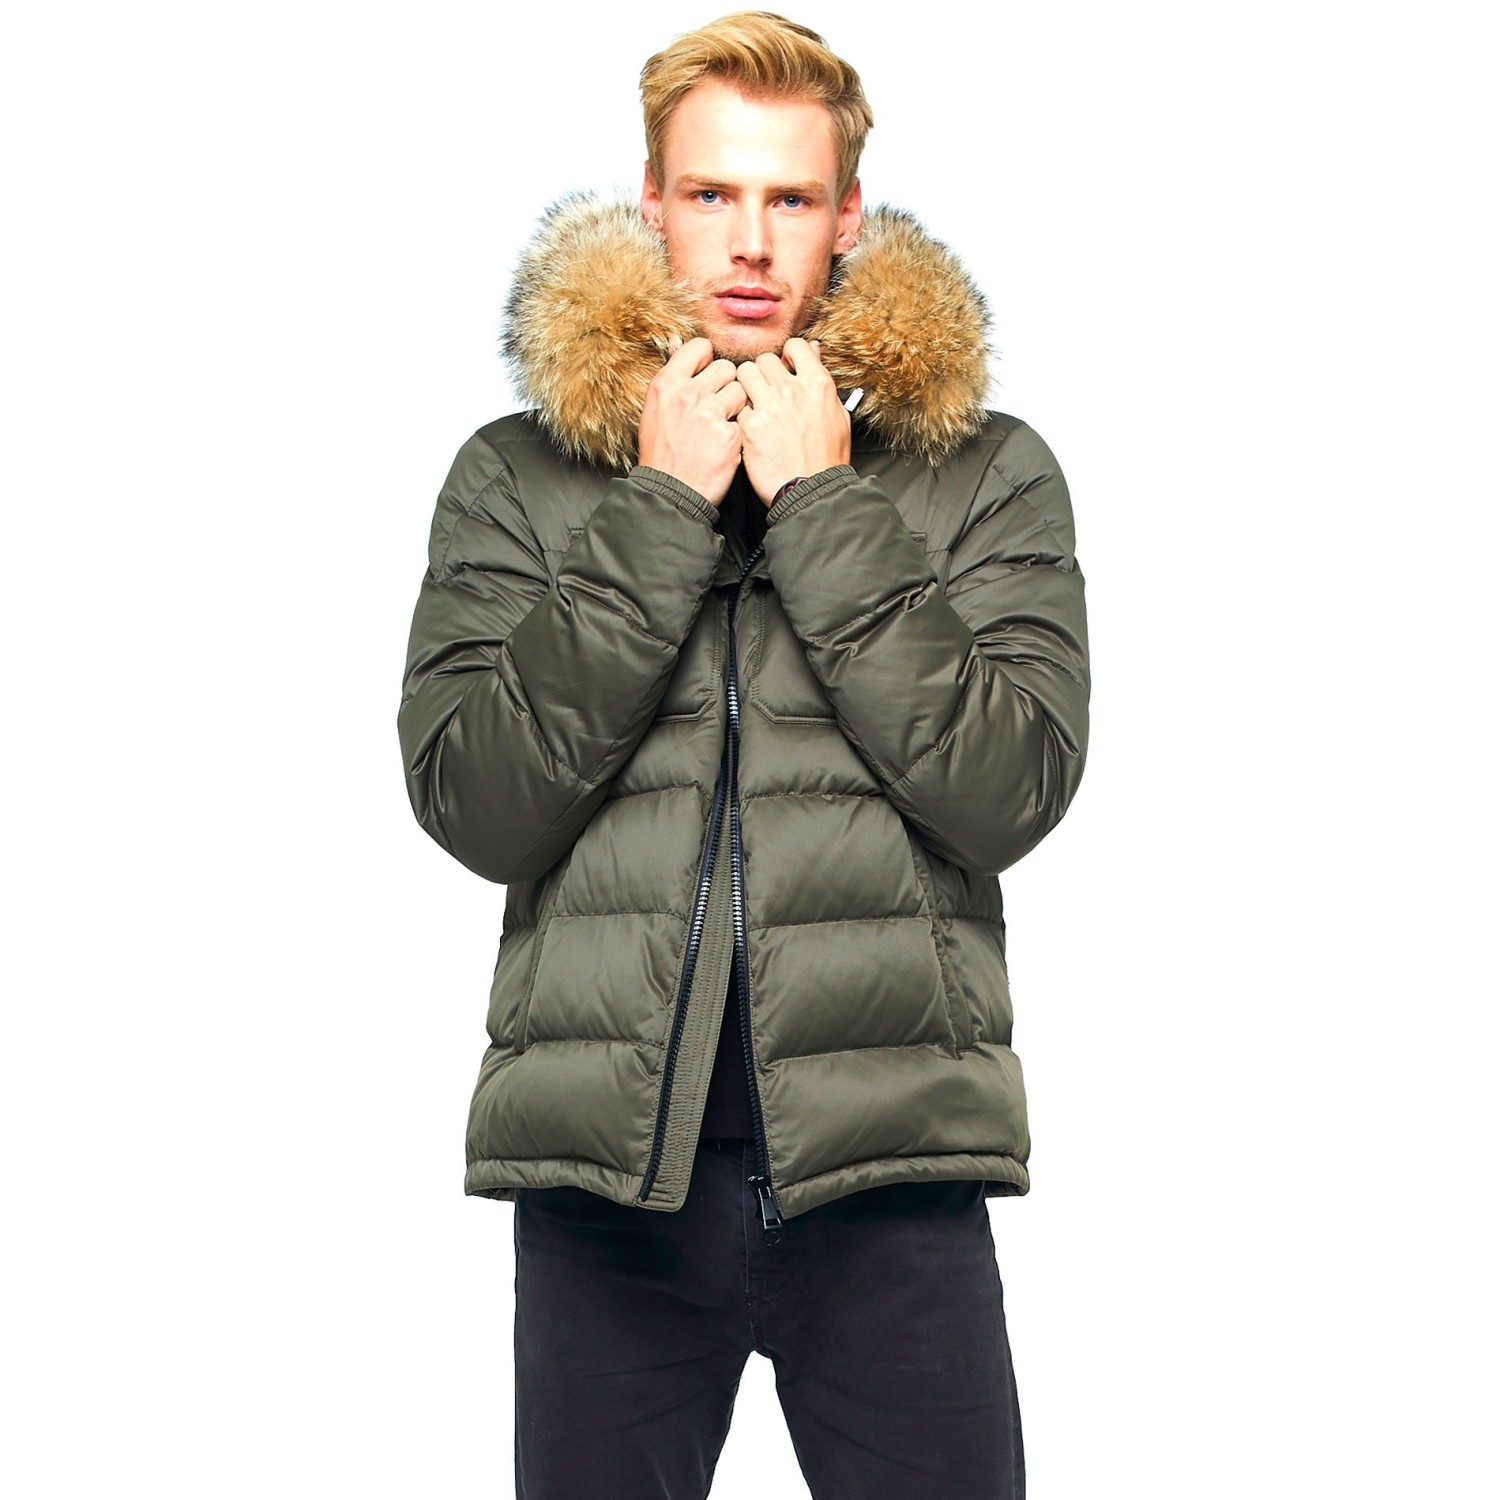 P&E Mens Faux Fur Lined Padded Fleece Hoodid Quilted Vogue Jacket Parka Coat 